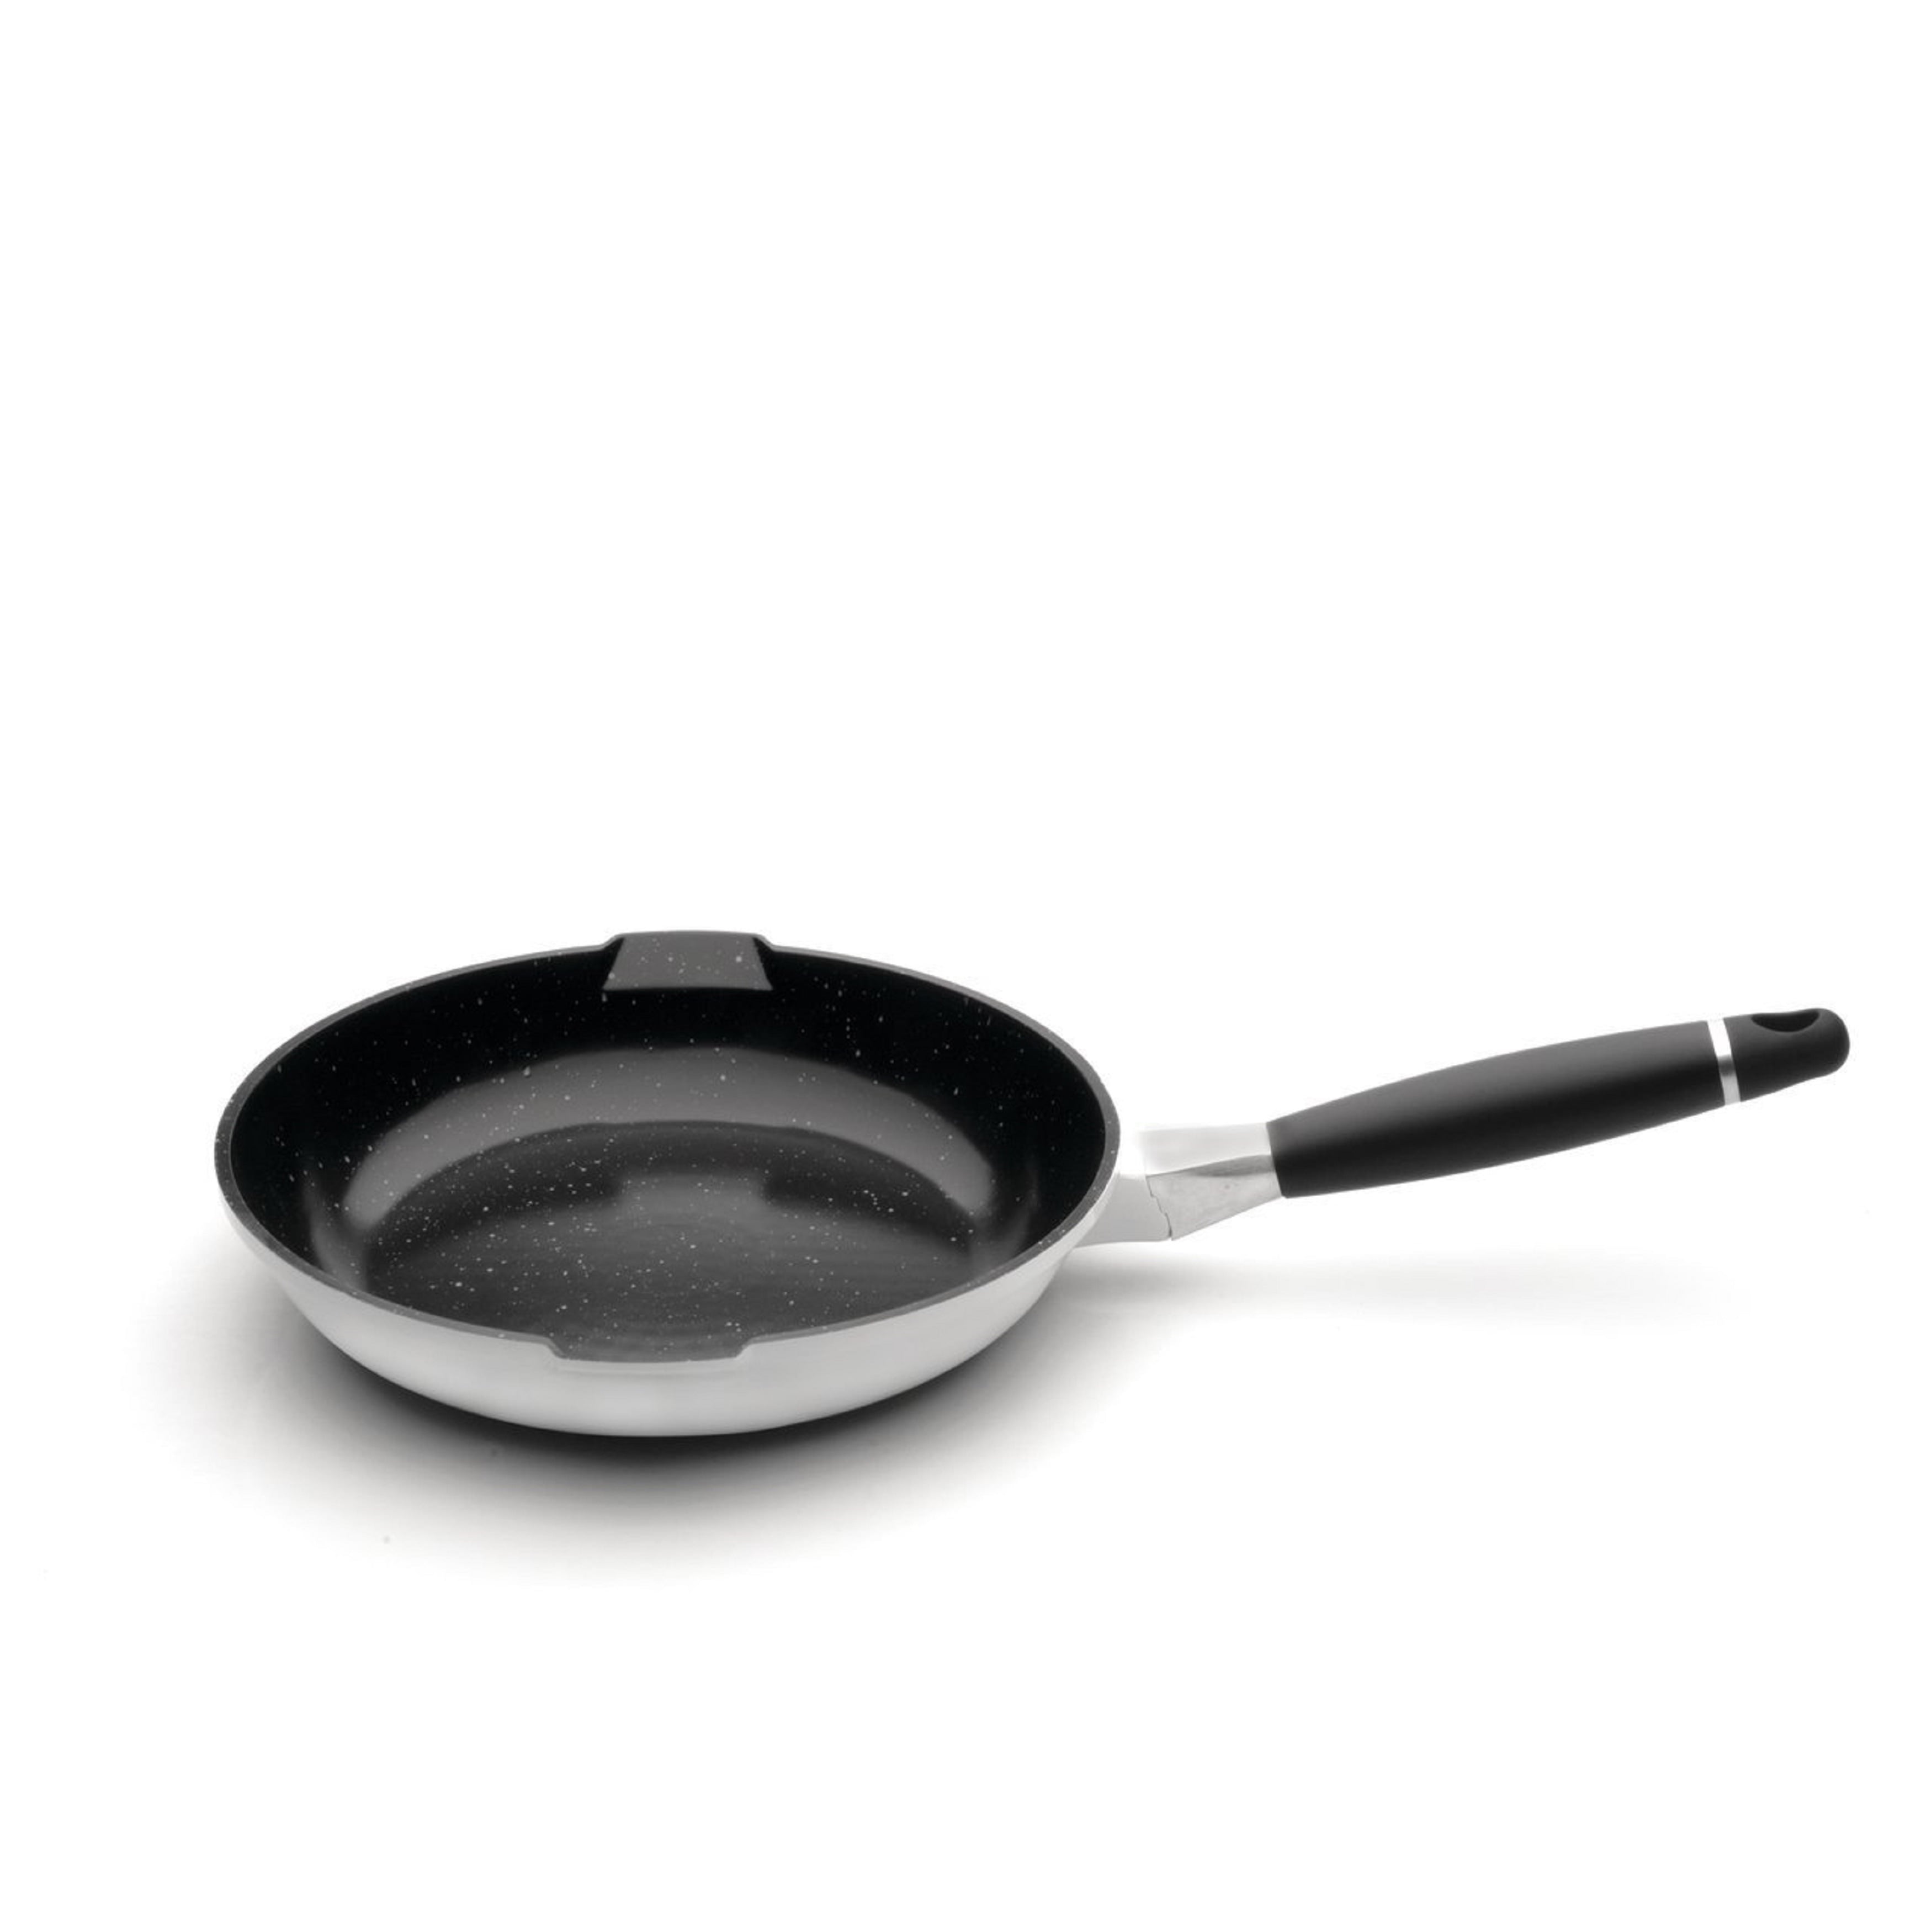 BergHOFF International 11 Non Stick Ceramic Frying Pan with Lid